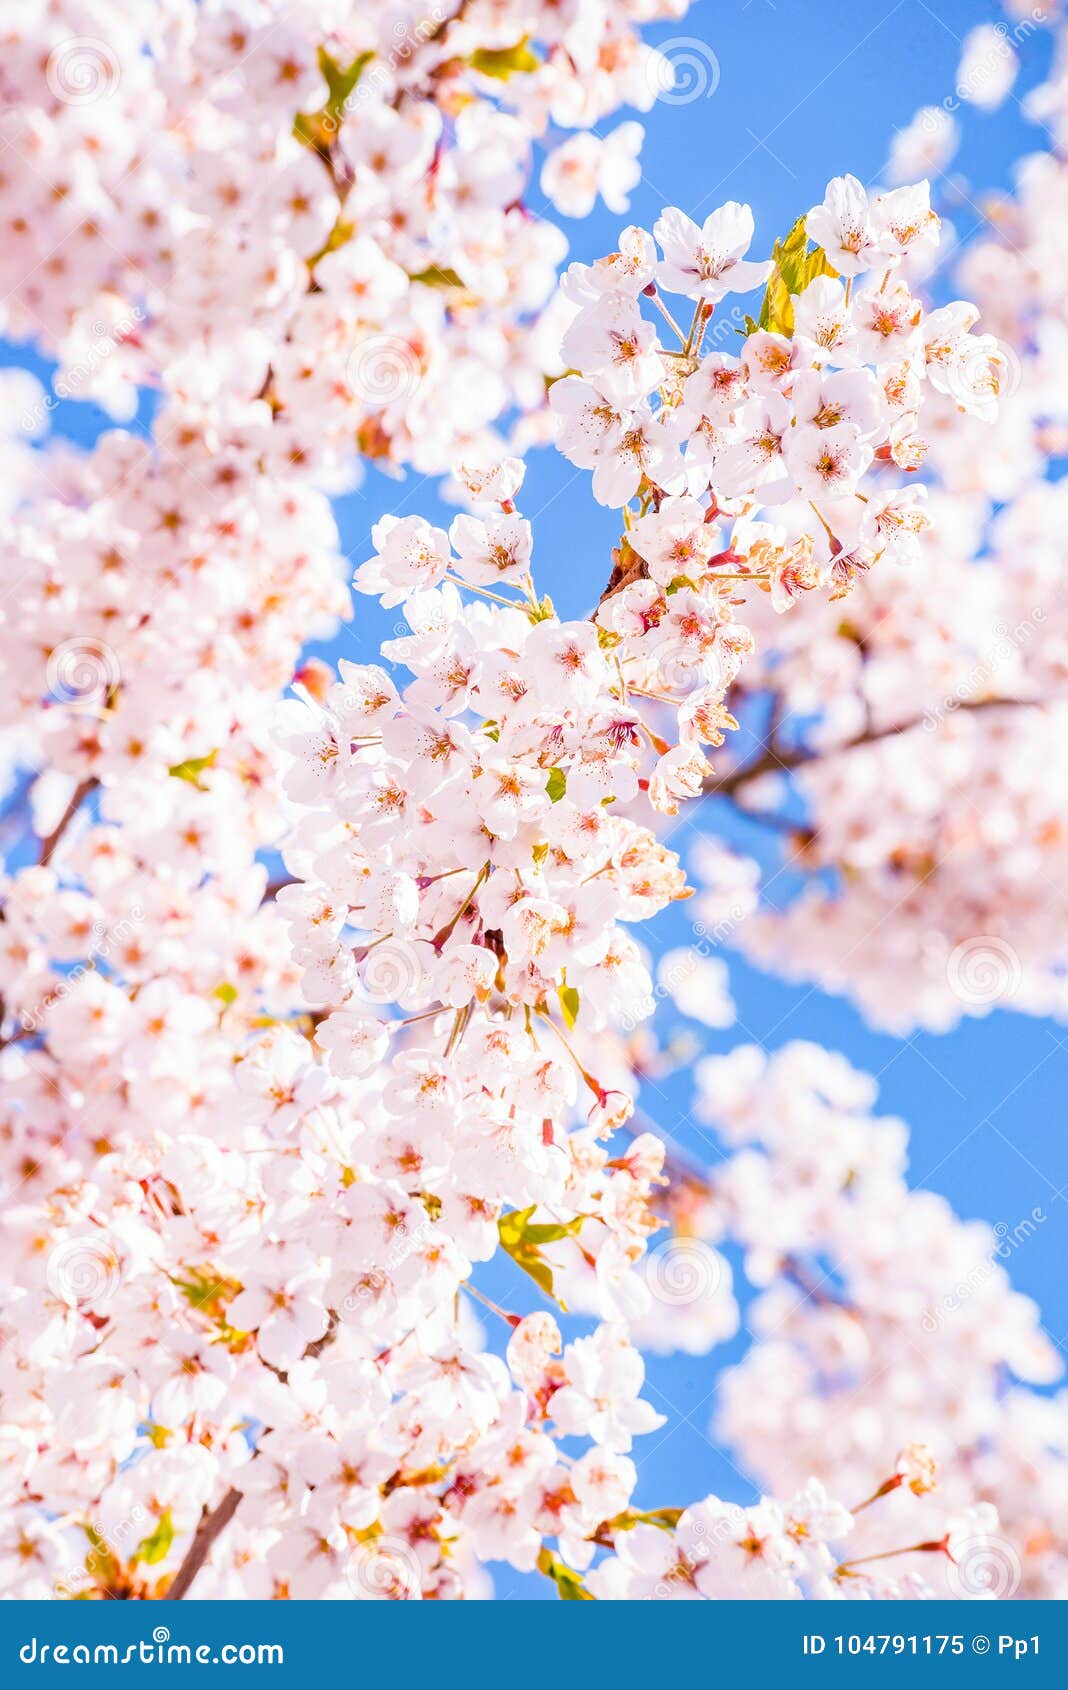 cherry blossom tree detail, pink and blue background